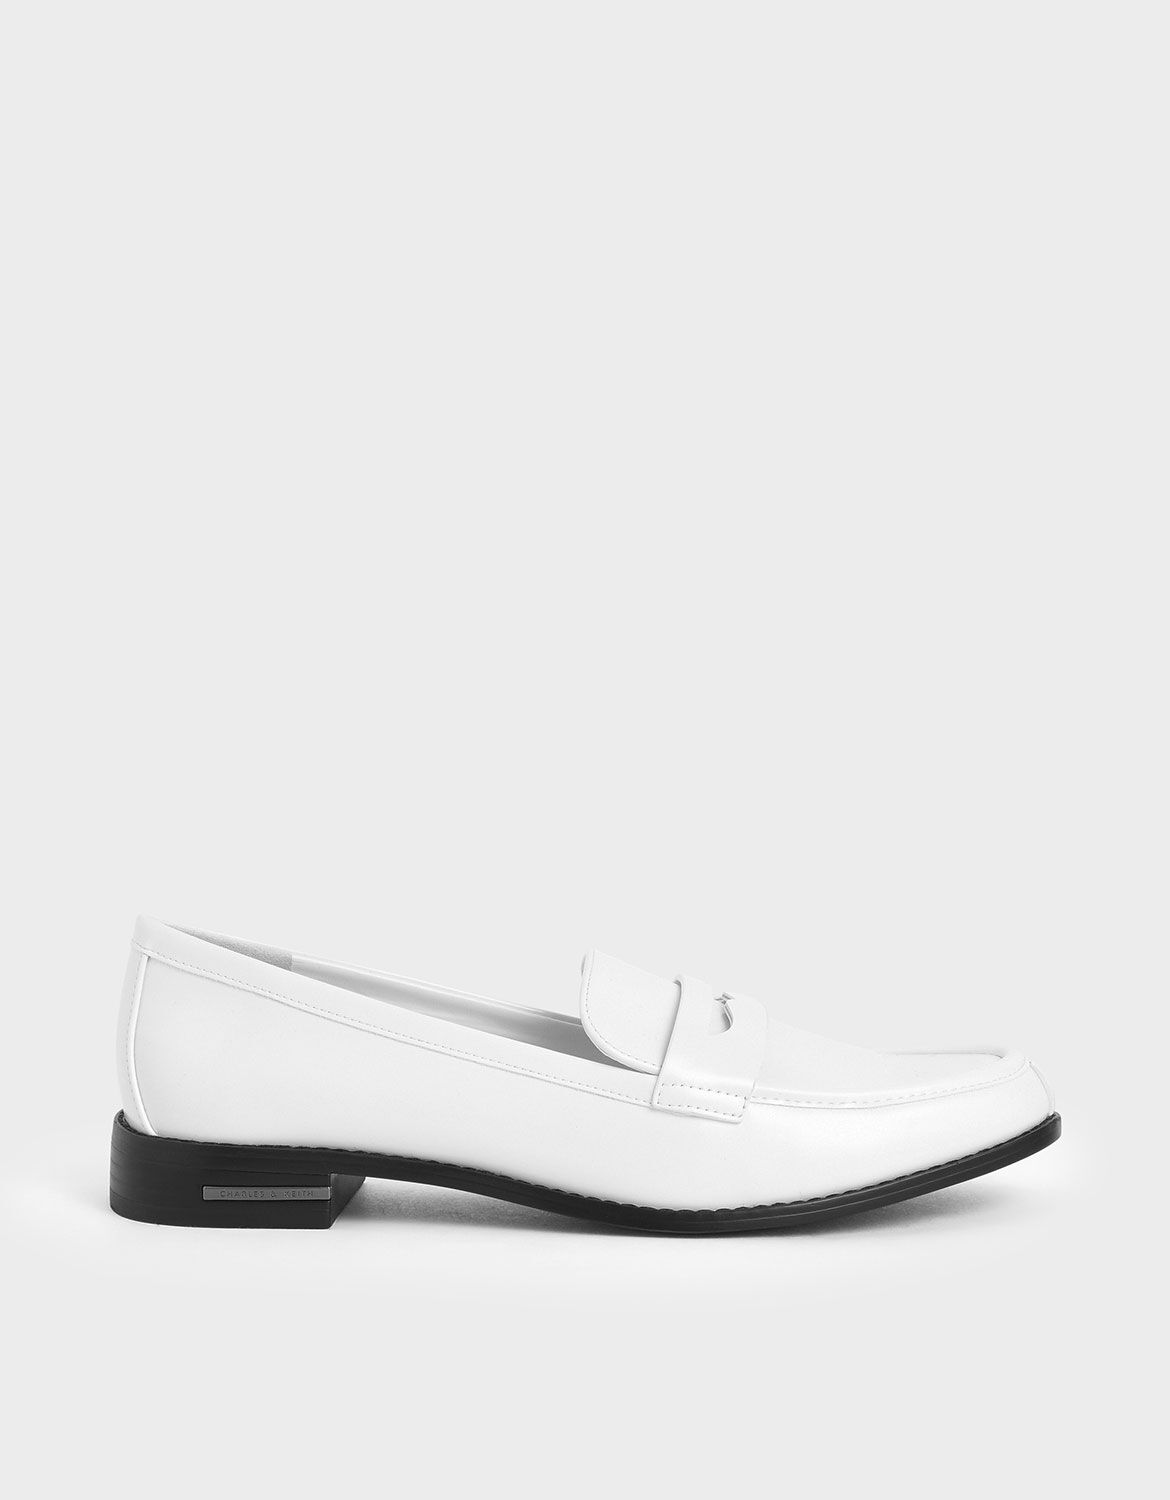 penny loafers black and white